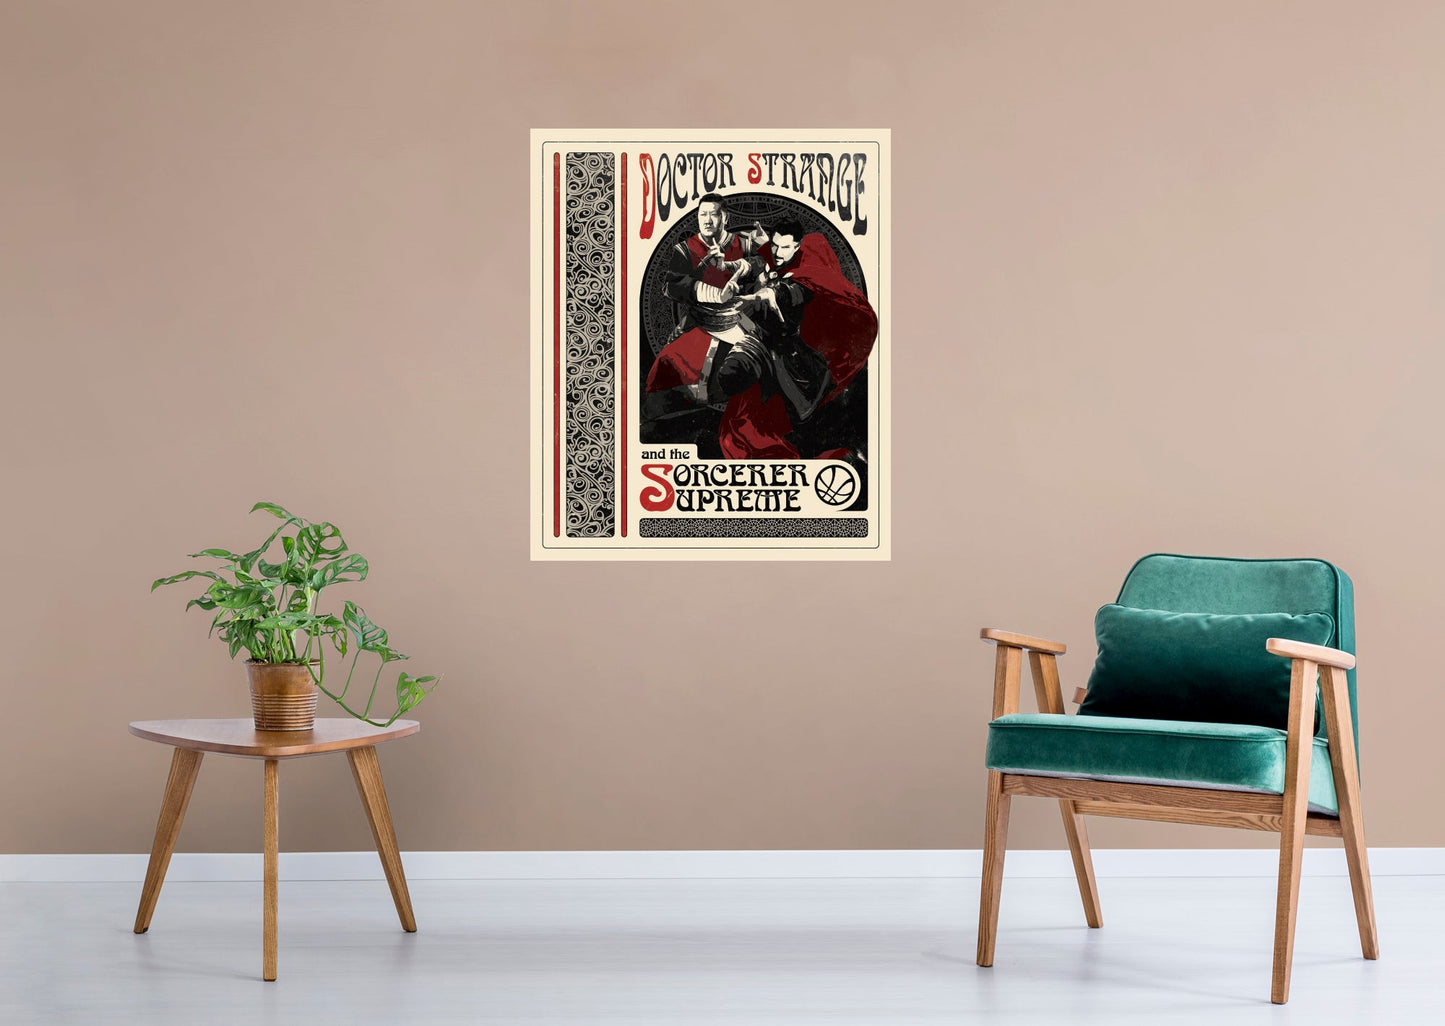 Doctor Strange 2: In the Multiverse of Madness: The Sorcerer Supreme Poster - Officially Licensed Marvel Removable Adhesive Decal